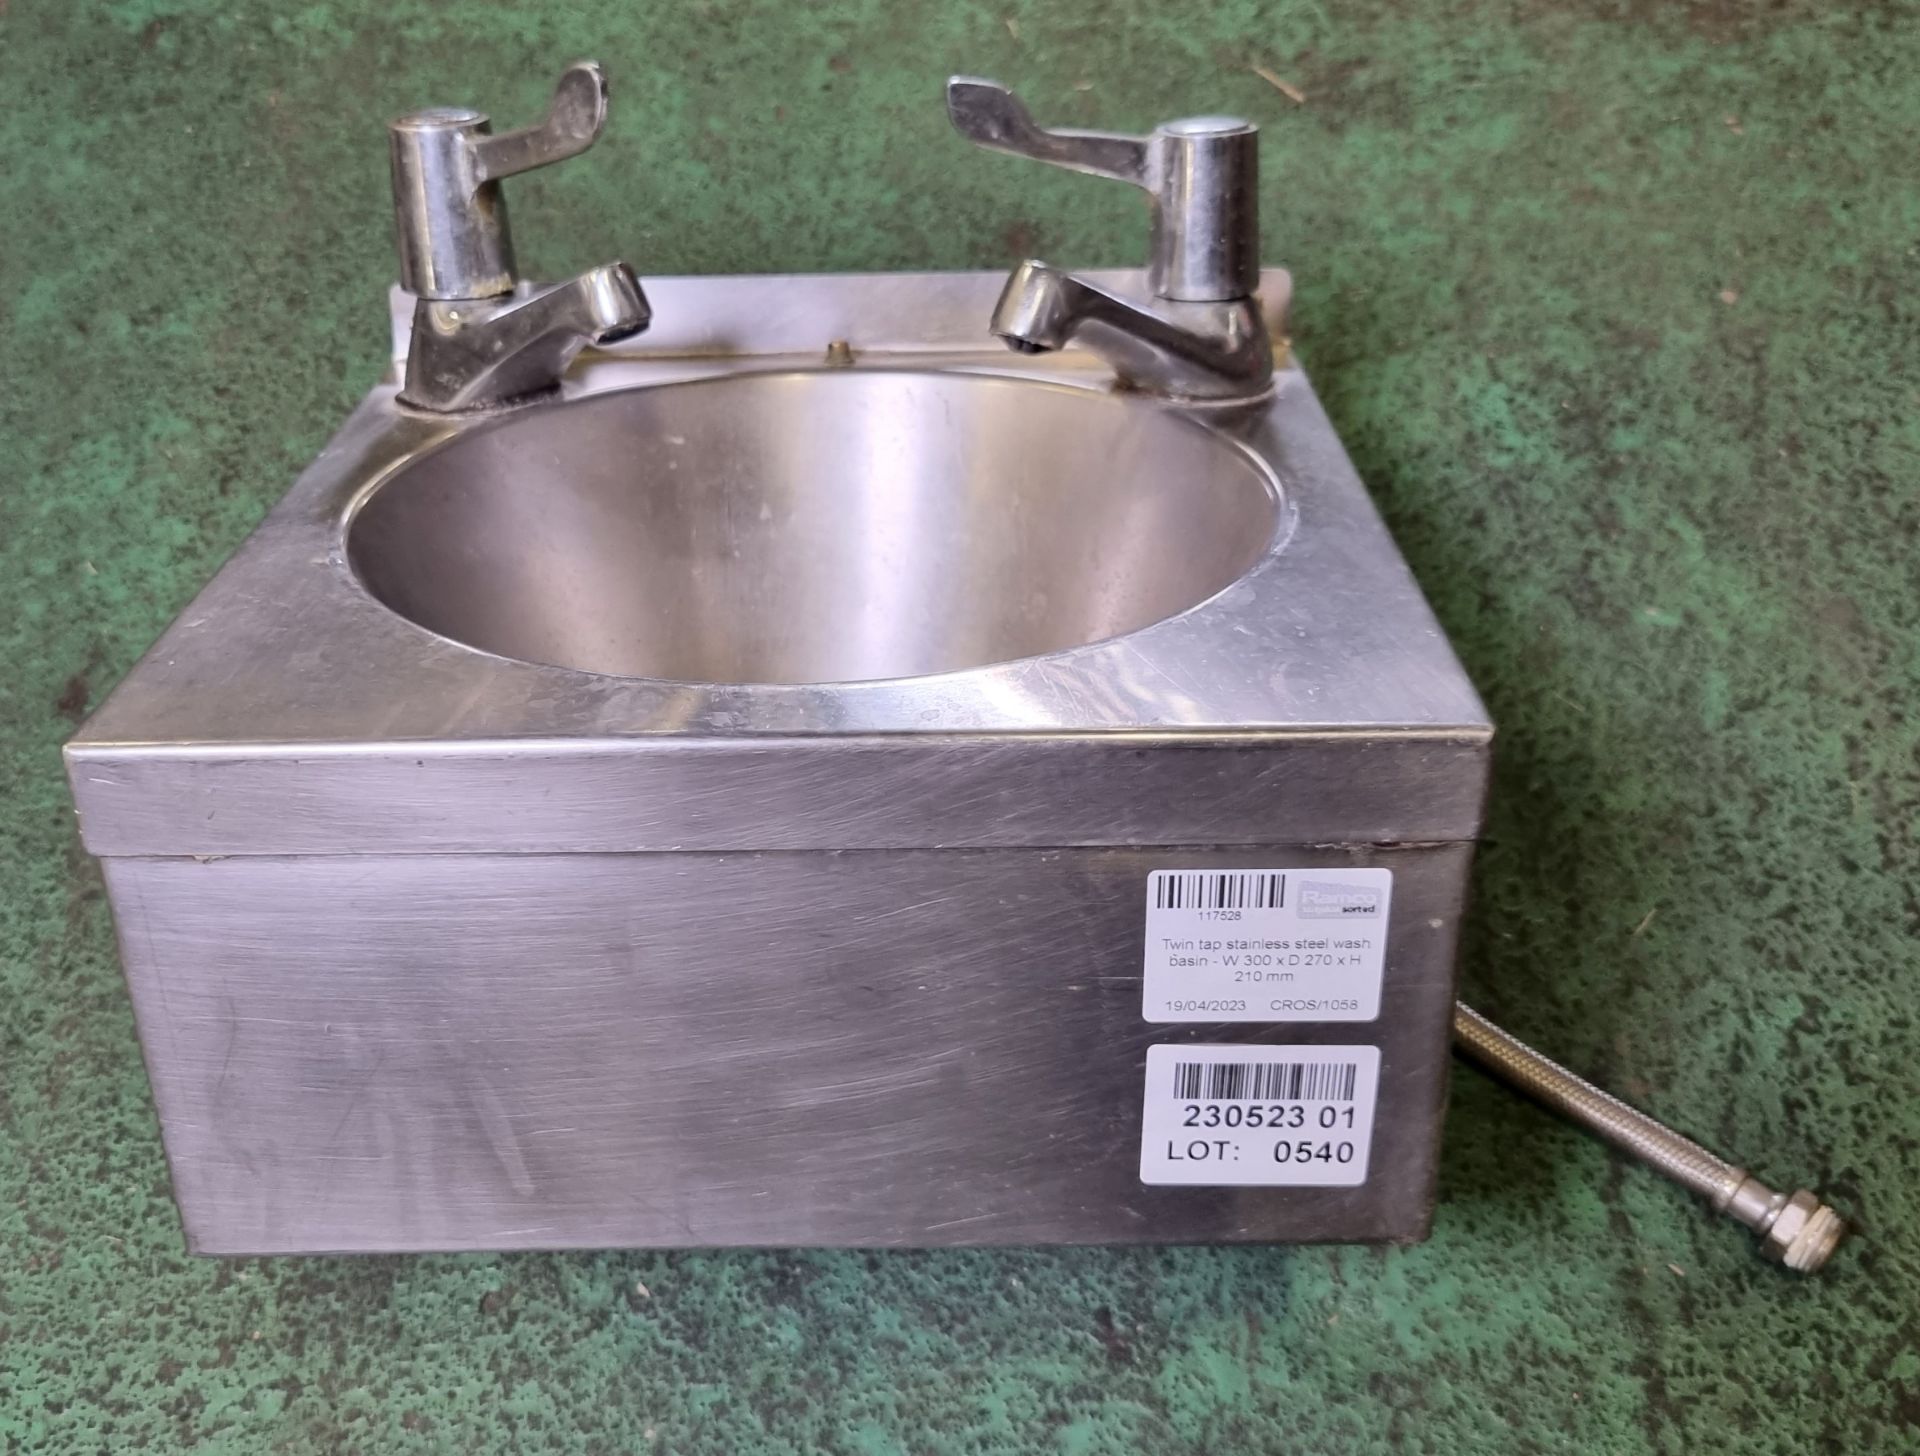 Twin tap stainless steel wash basin - W 300 x D 270 x H 210 mm